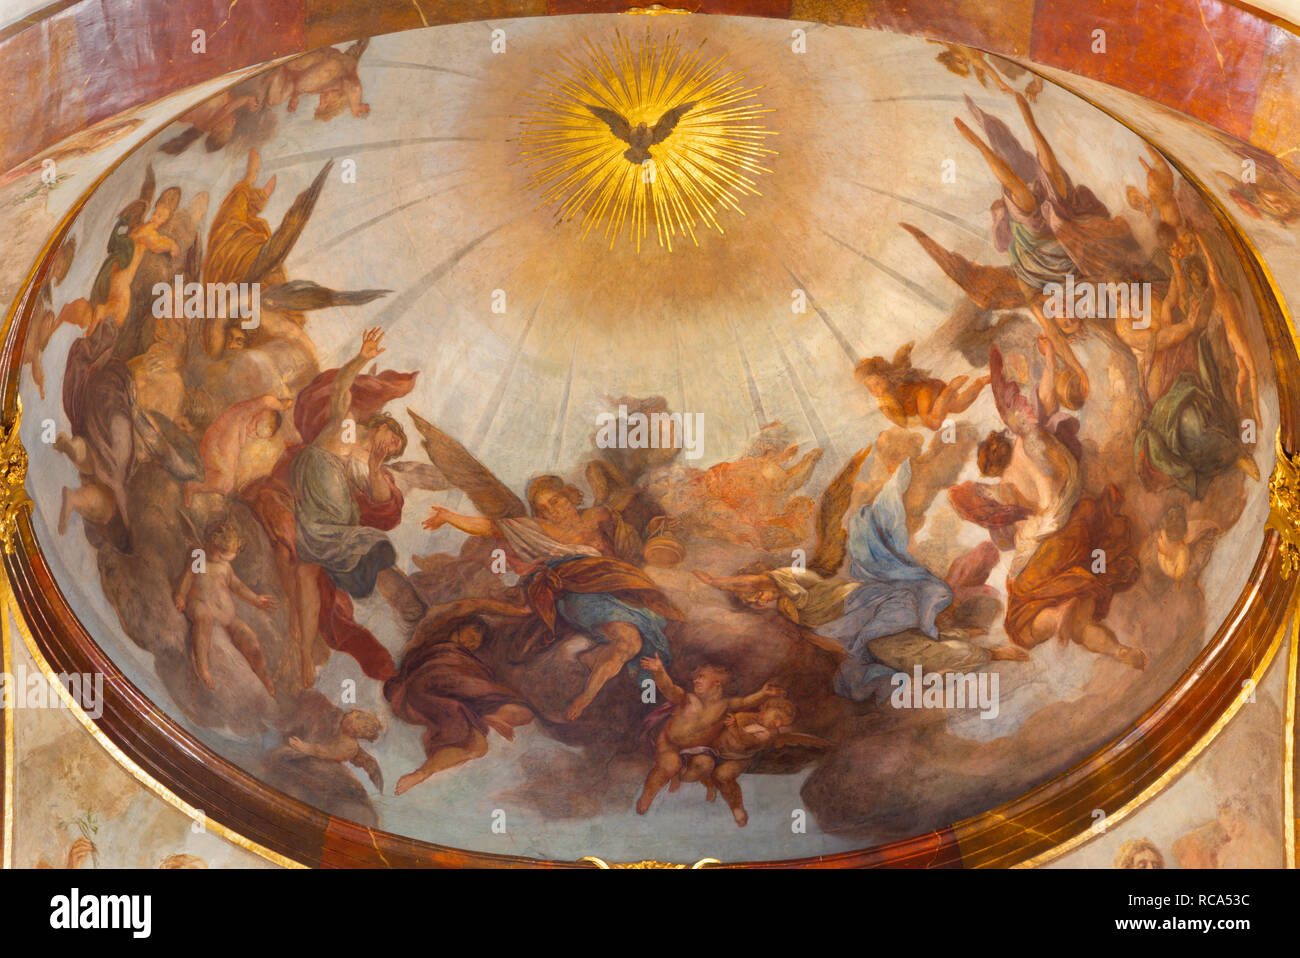 PRAGUE, CZECH REPUBLIC - OCTOBER 12, 2018: The ceiling fresco of Holy Spirit among the angels in St. Francis of Assisi church by Jan Kryštof Liška Stock Photo